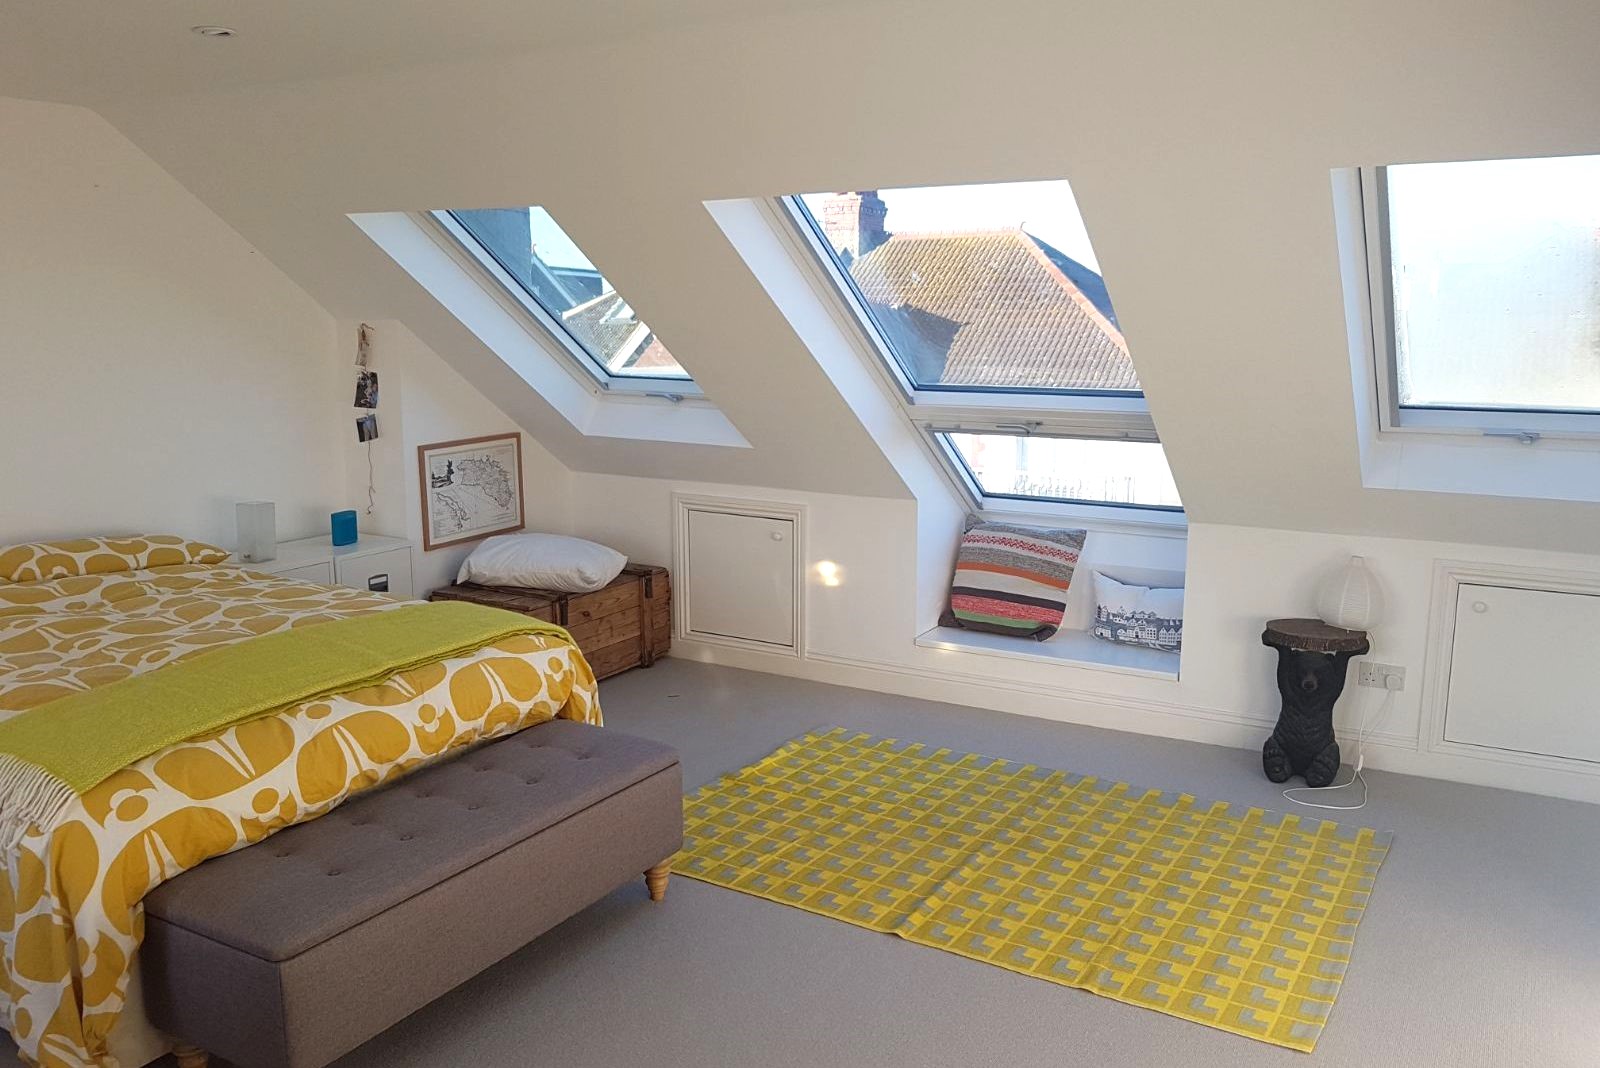 Loft conversion services for architectural design services in the South East